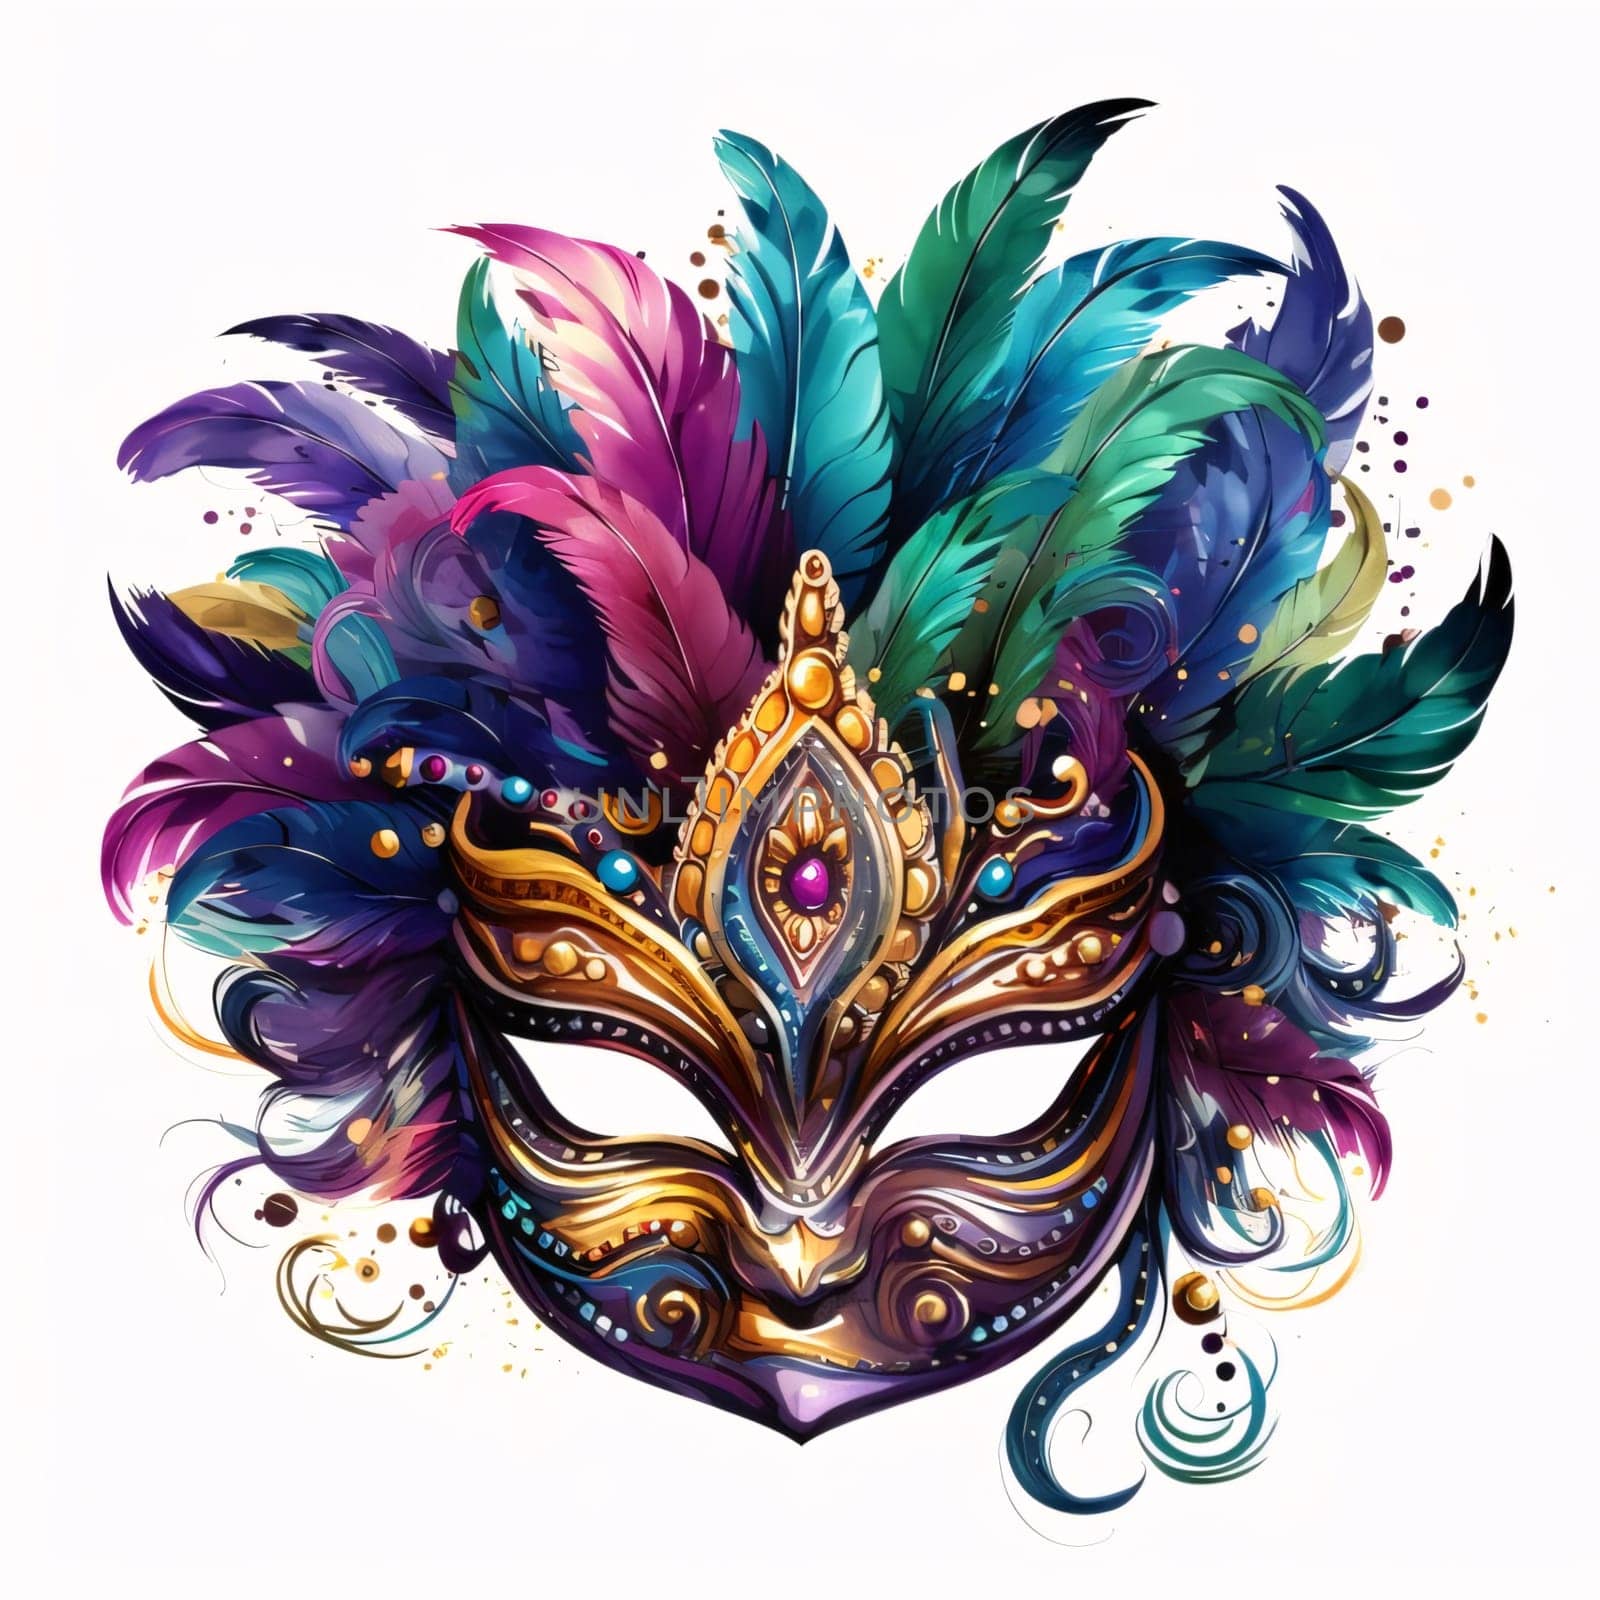 Gold eye mask with colorful decorations and feathers on a white background. Carnival outfits, masks and decorations. A time of fun and celebration before the fast.